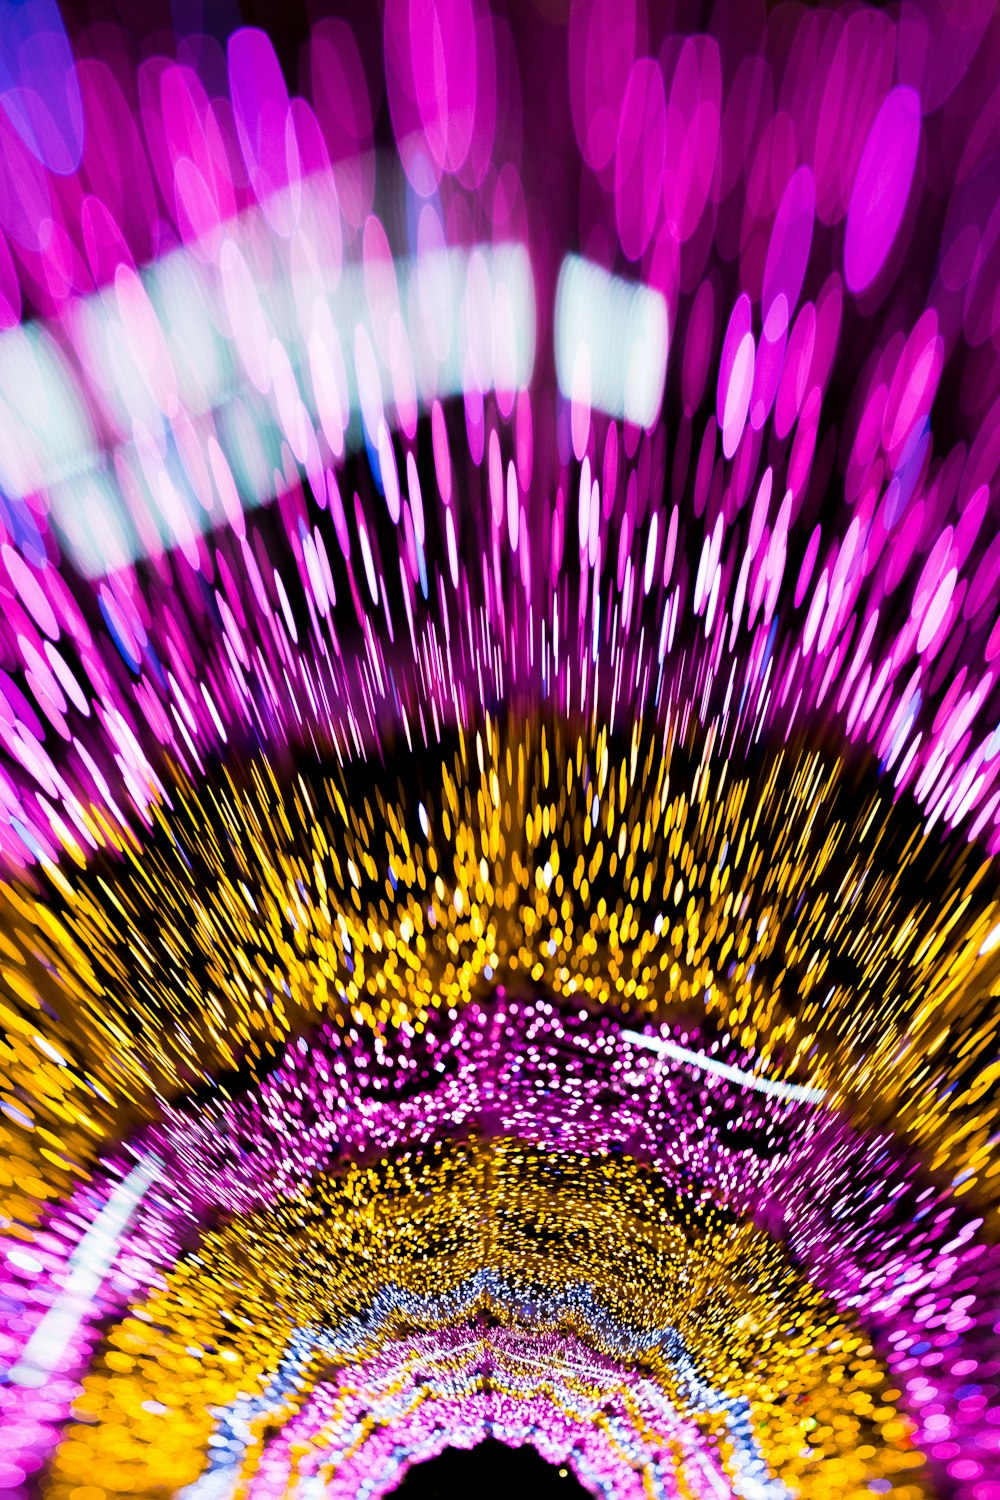 an abstract image of a purple and yellow object